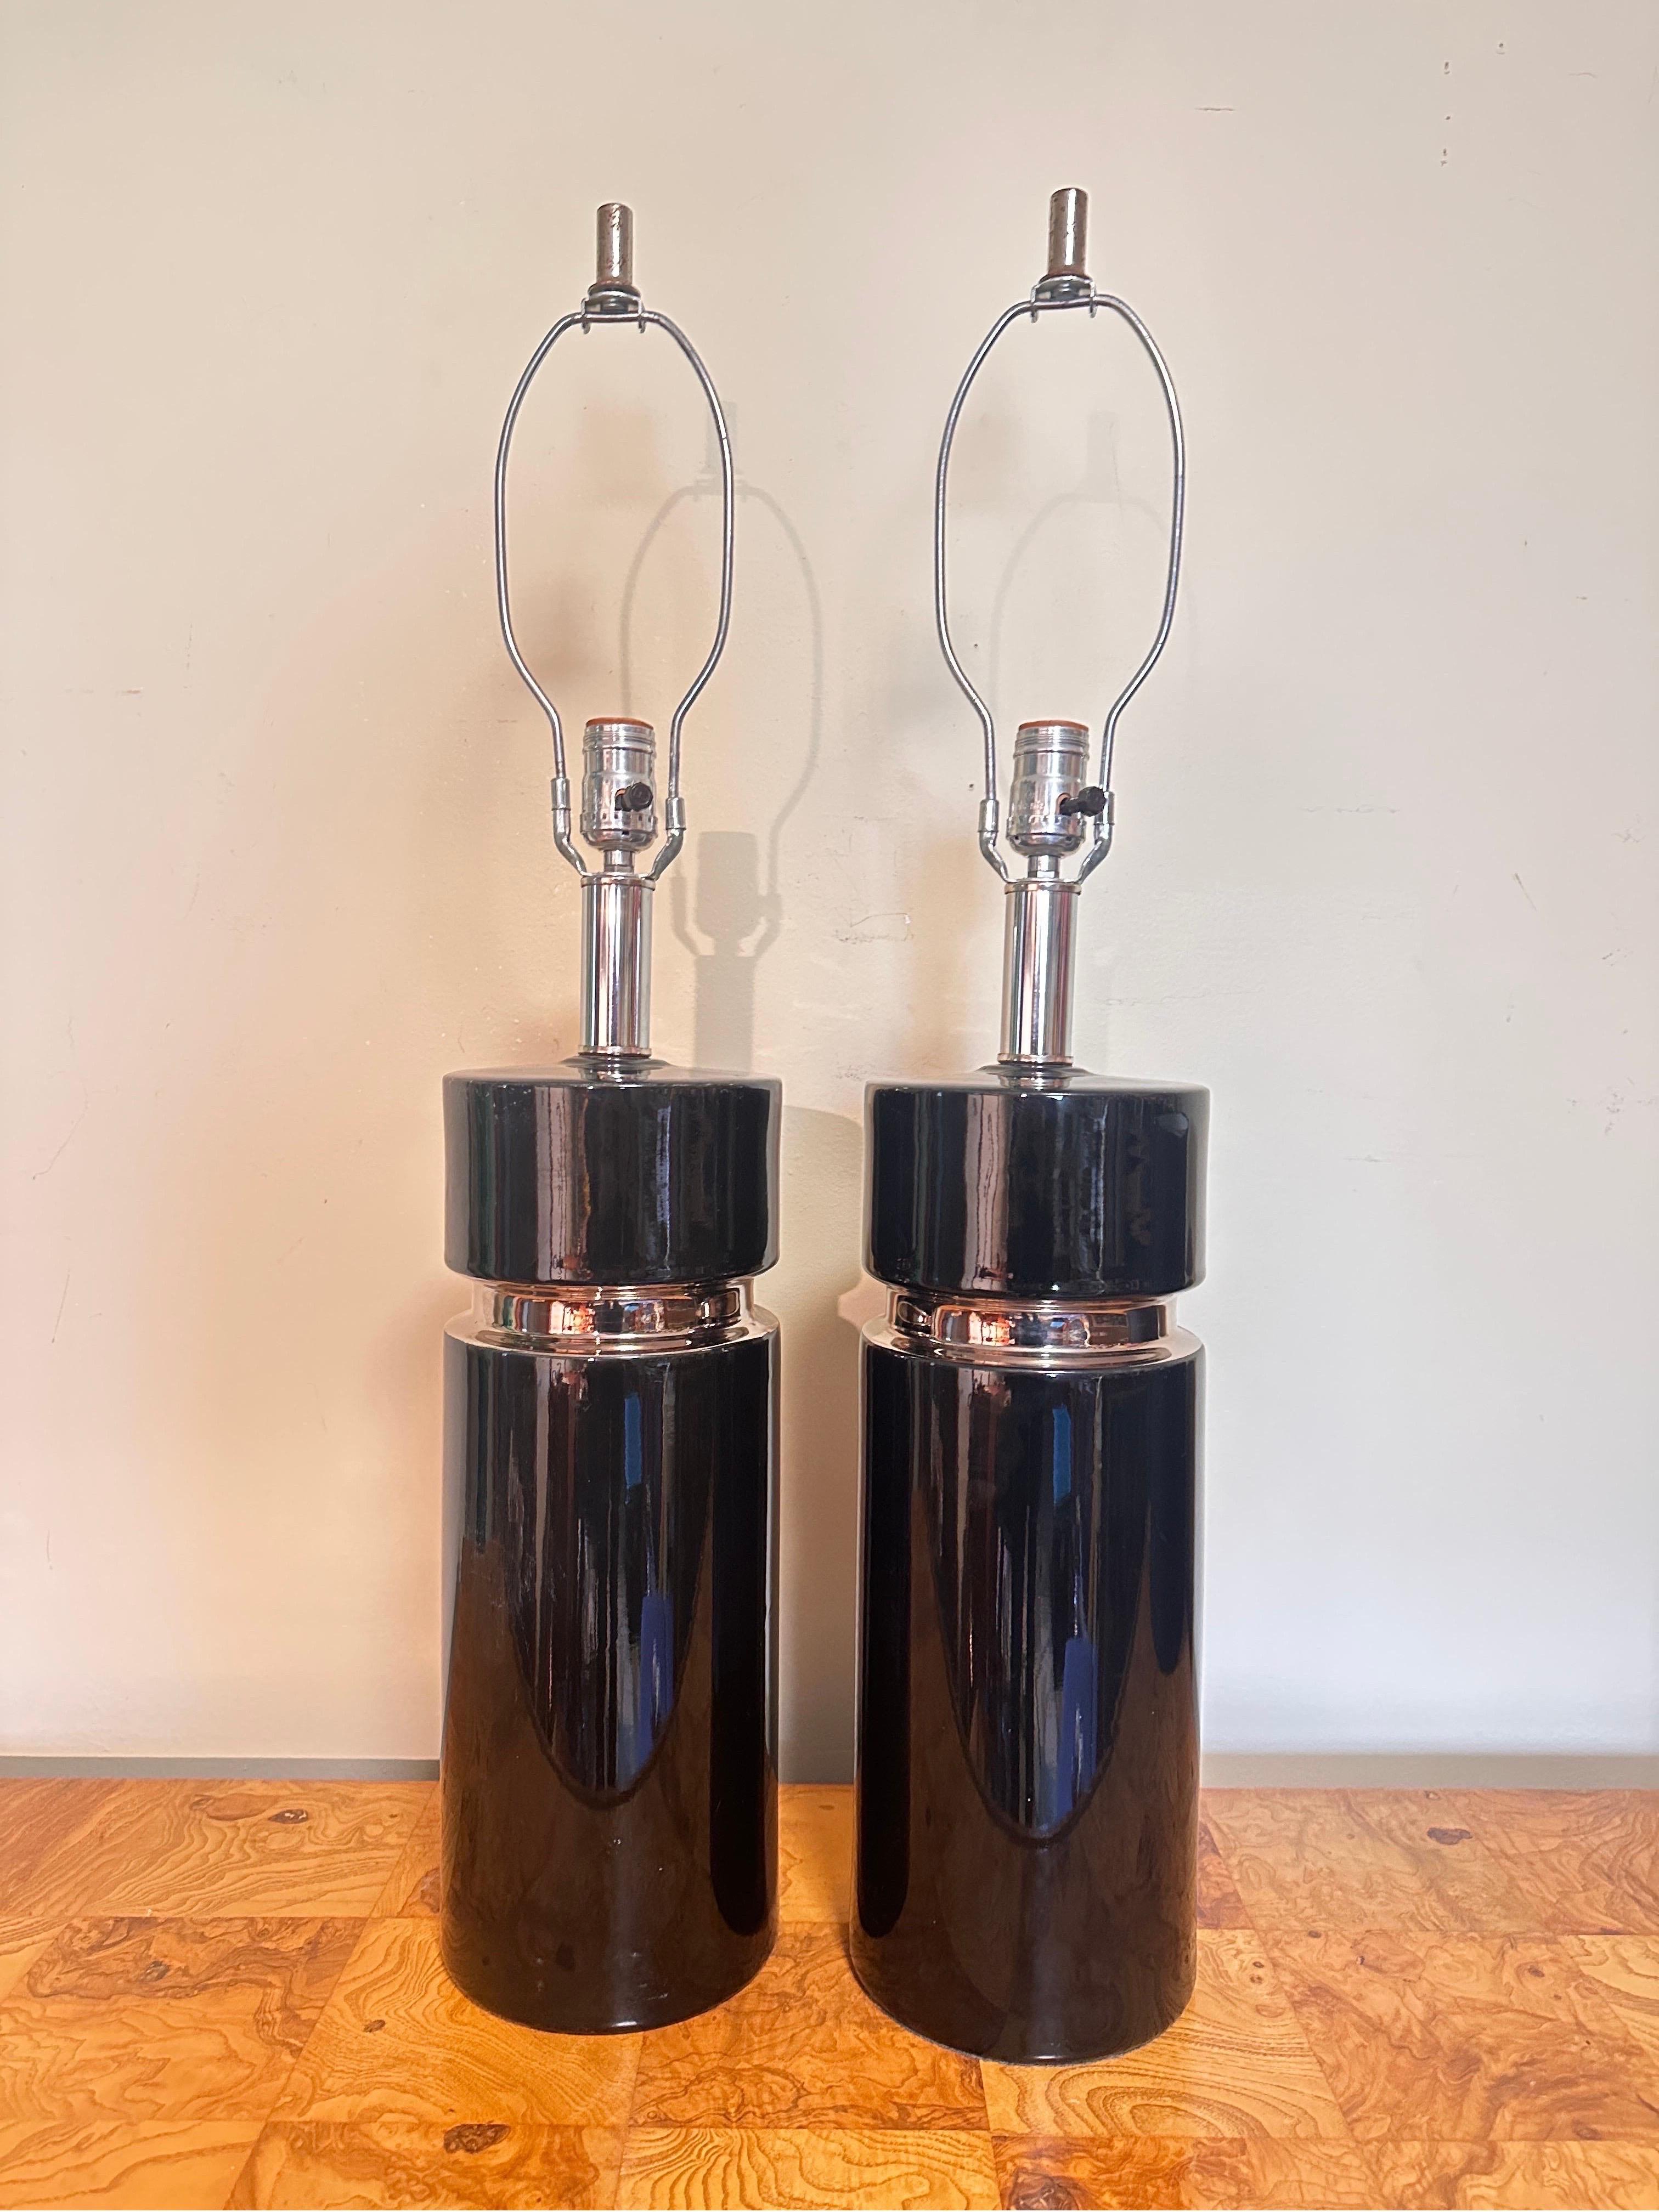 Exceptionally sleek showing authentic vintage charm. Attributed elsewhere to ‘Pierre Cardin’ but not marked. Glossy glaze of black and silver chrome. Chrome neck and finials. 1960s or 1970s production era.

(Pictured with modern lampshades measuring